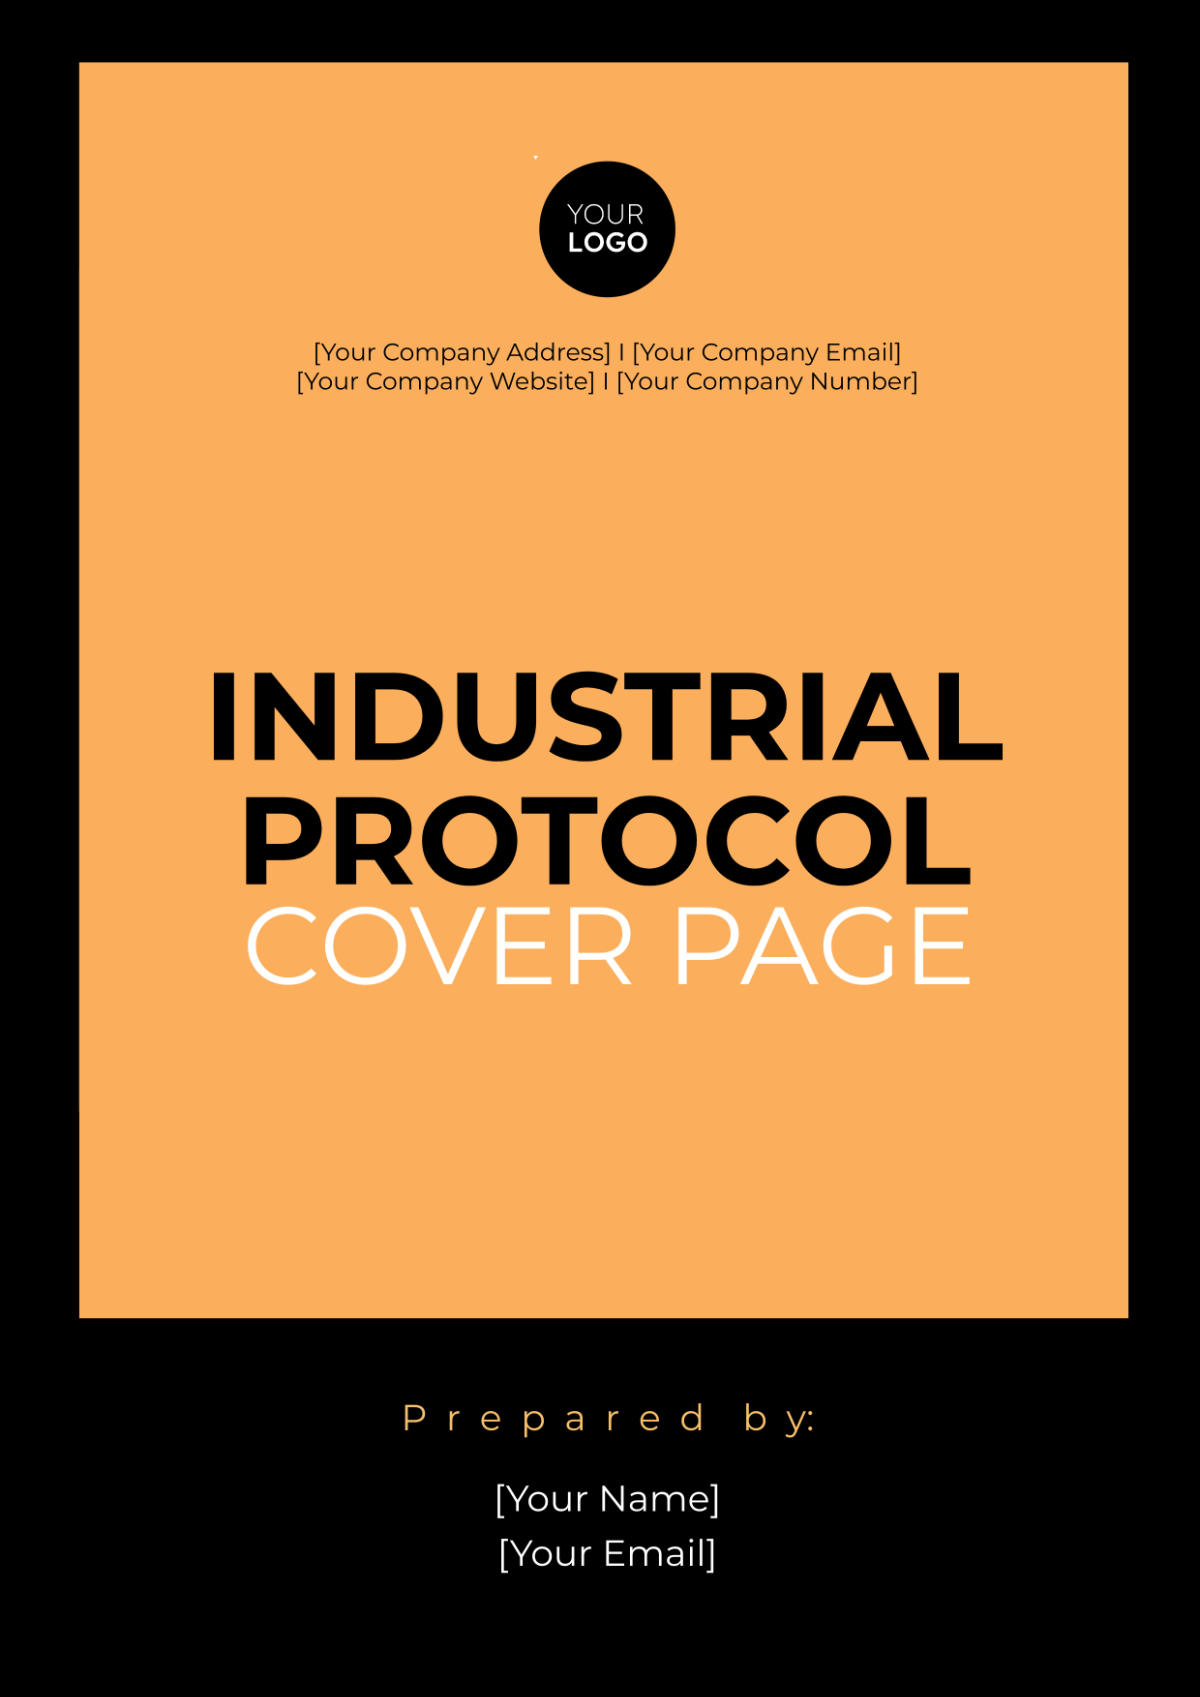 Industrial Protocol Cover Page